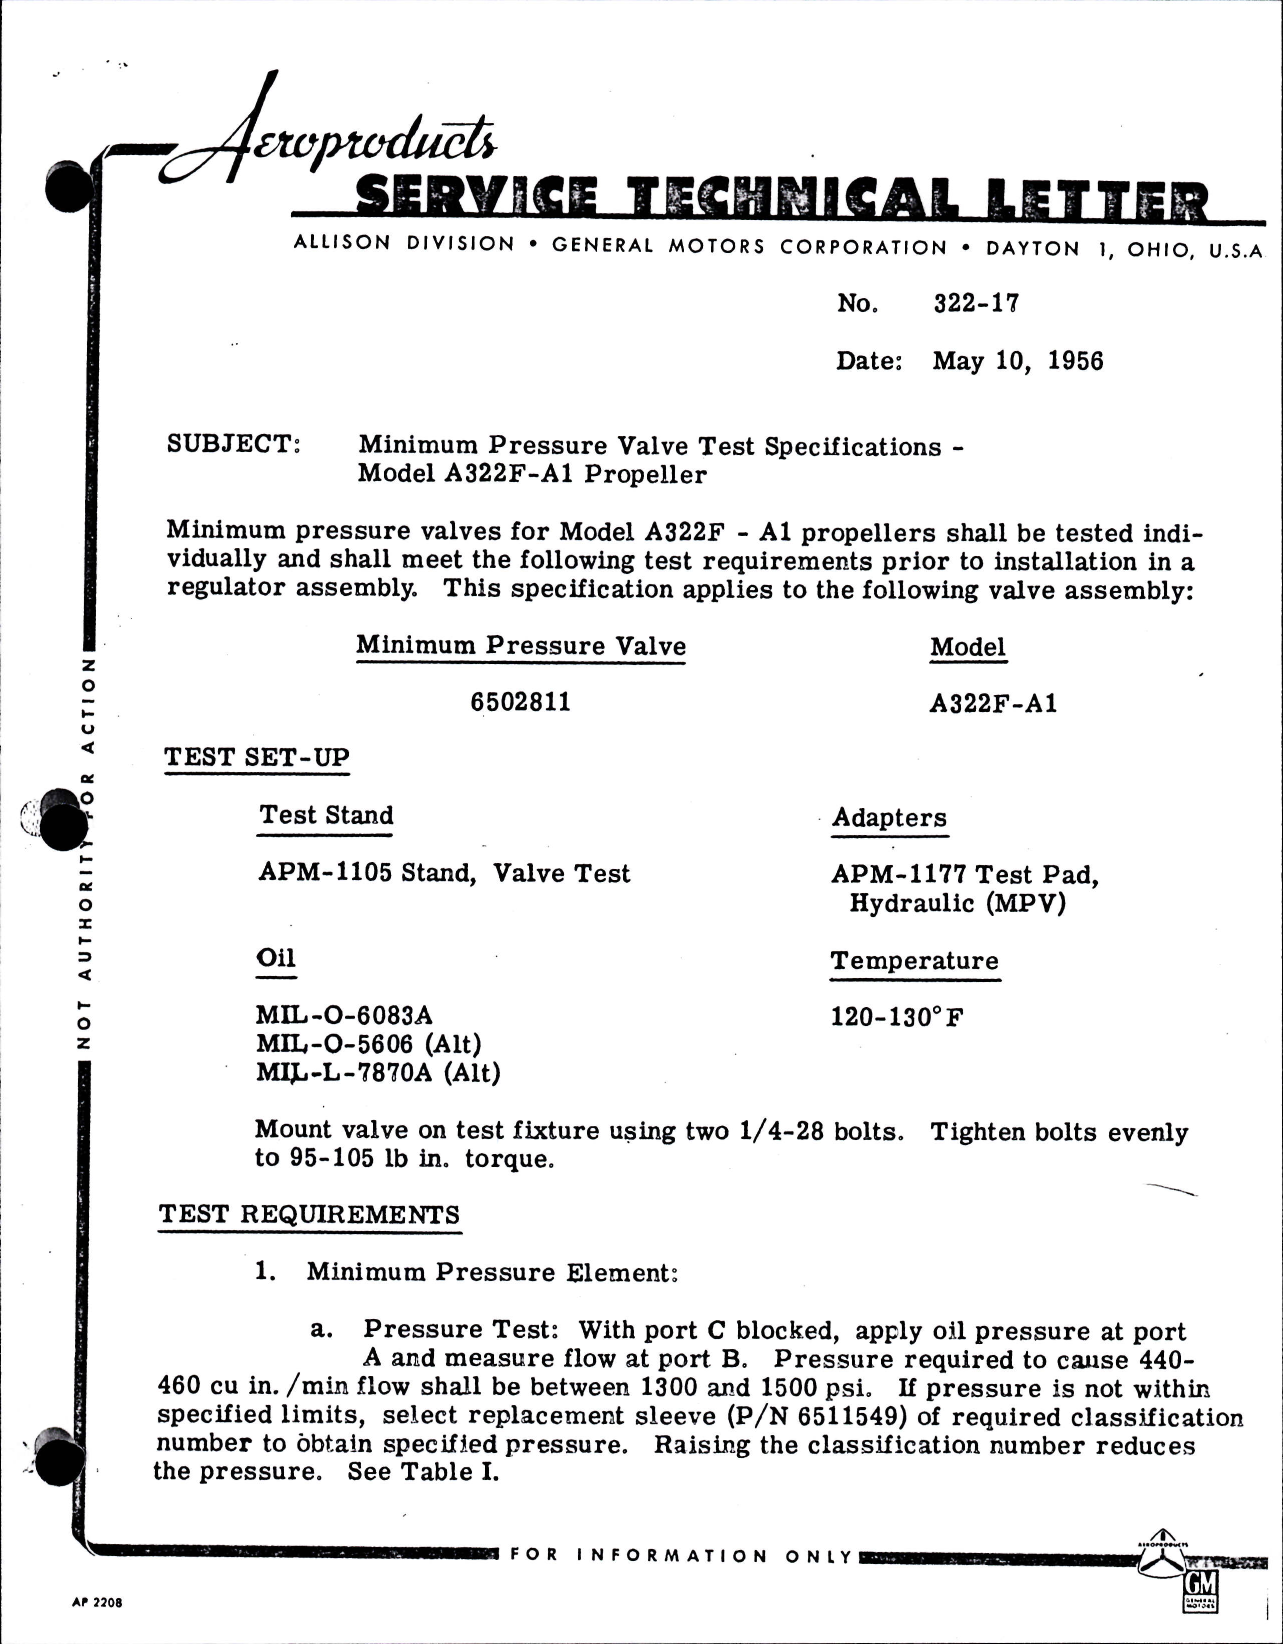 Sample page 1 from AirCorps Library document: Minimum Pressure Valve Test Specifications for Model A322F-A1 Propeller